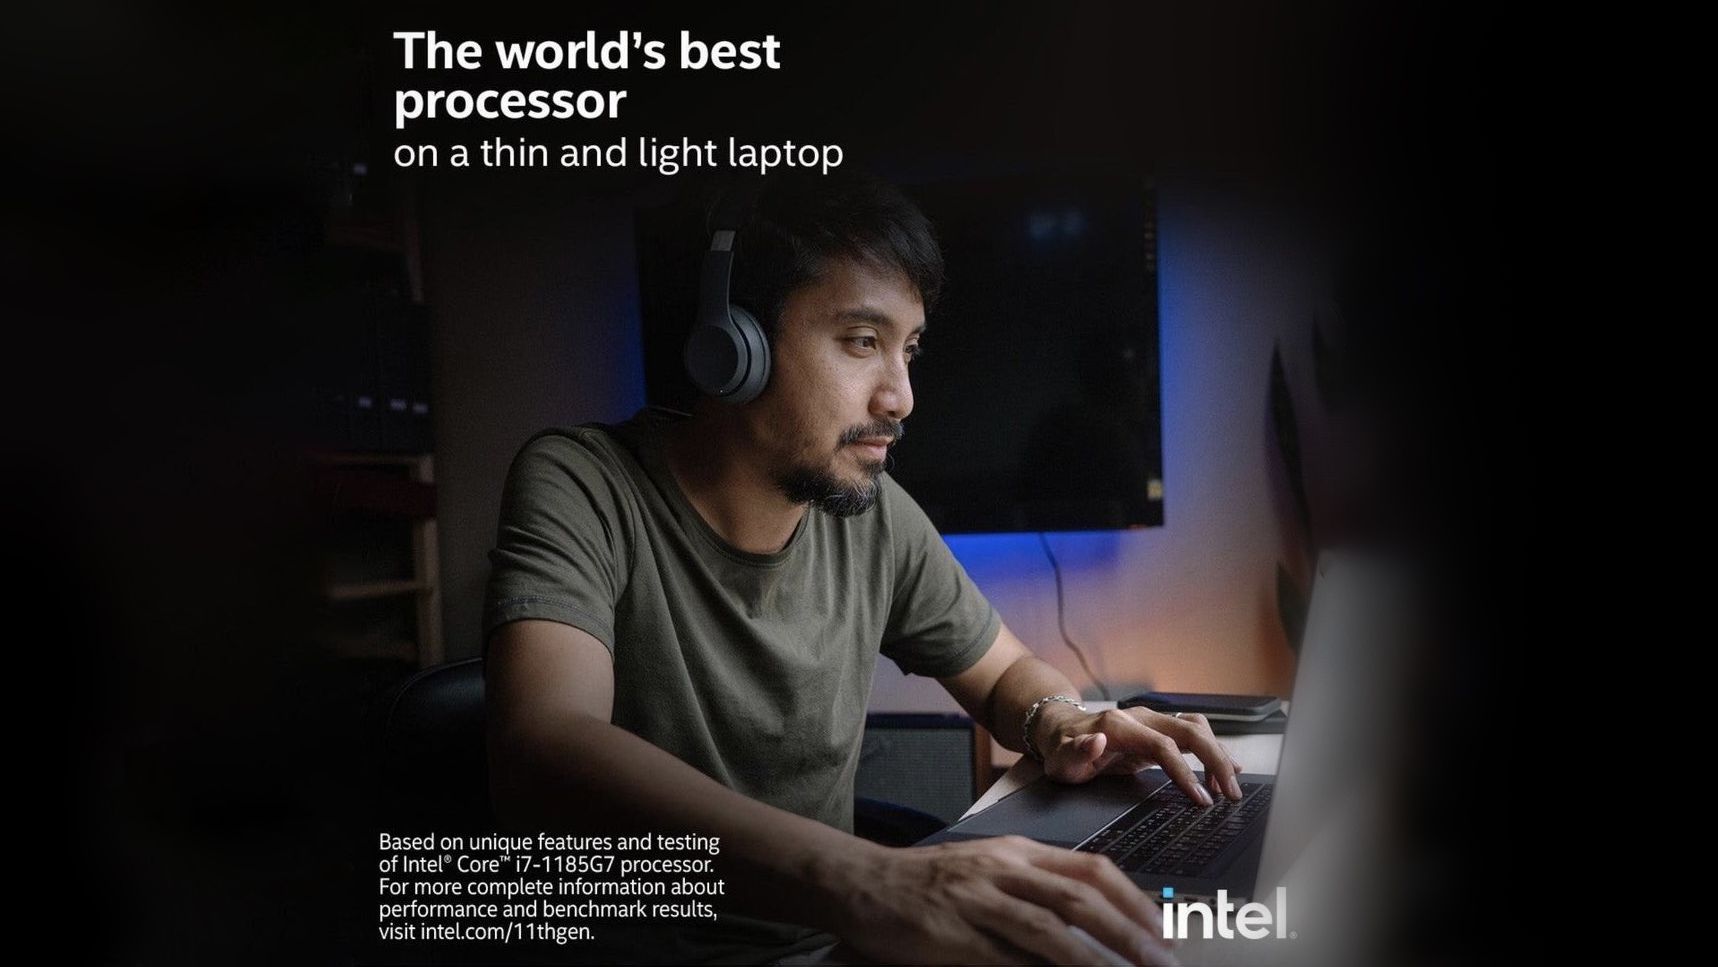 Intel’s “Best Processor in the World” ad has a MacBook Pro